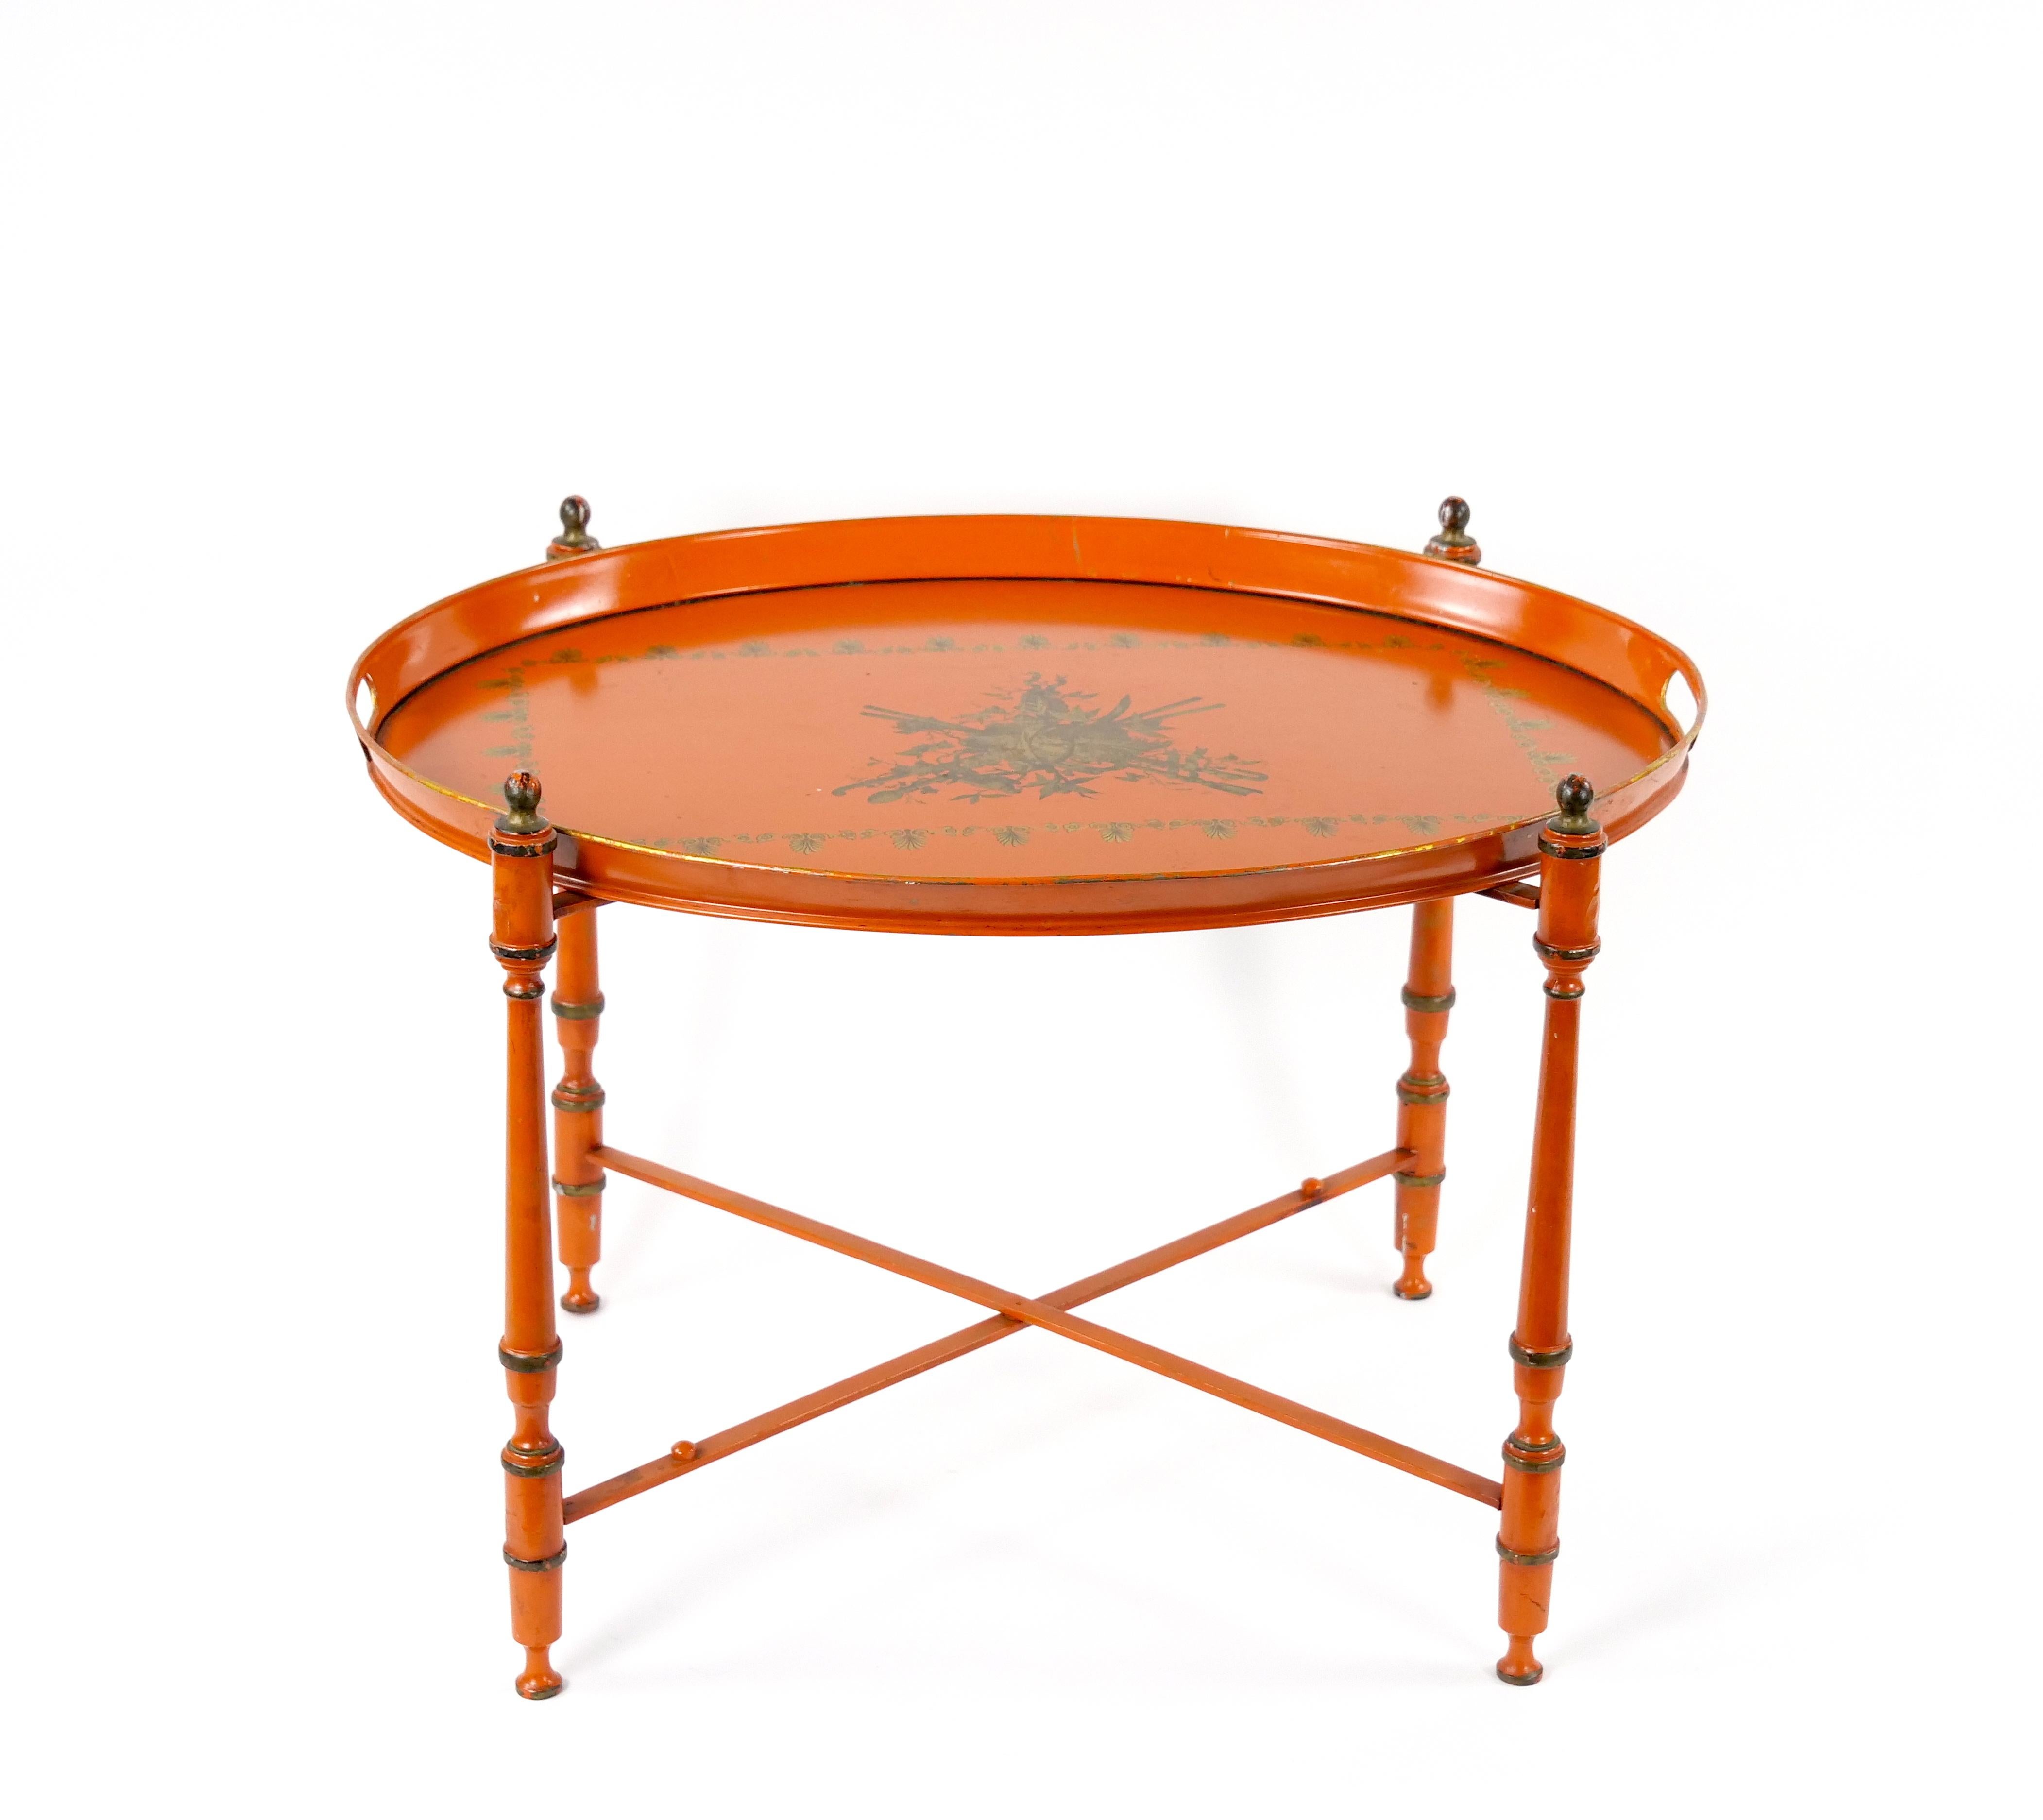 
Enhance your home decor with this timeless and charming late 20th century Italian cocktail folding table. Crafted in the neoclassical style, this table is a work of art, adorned with intricate hand- painted details and finished in a captivating